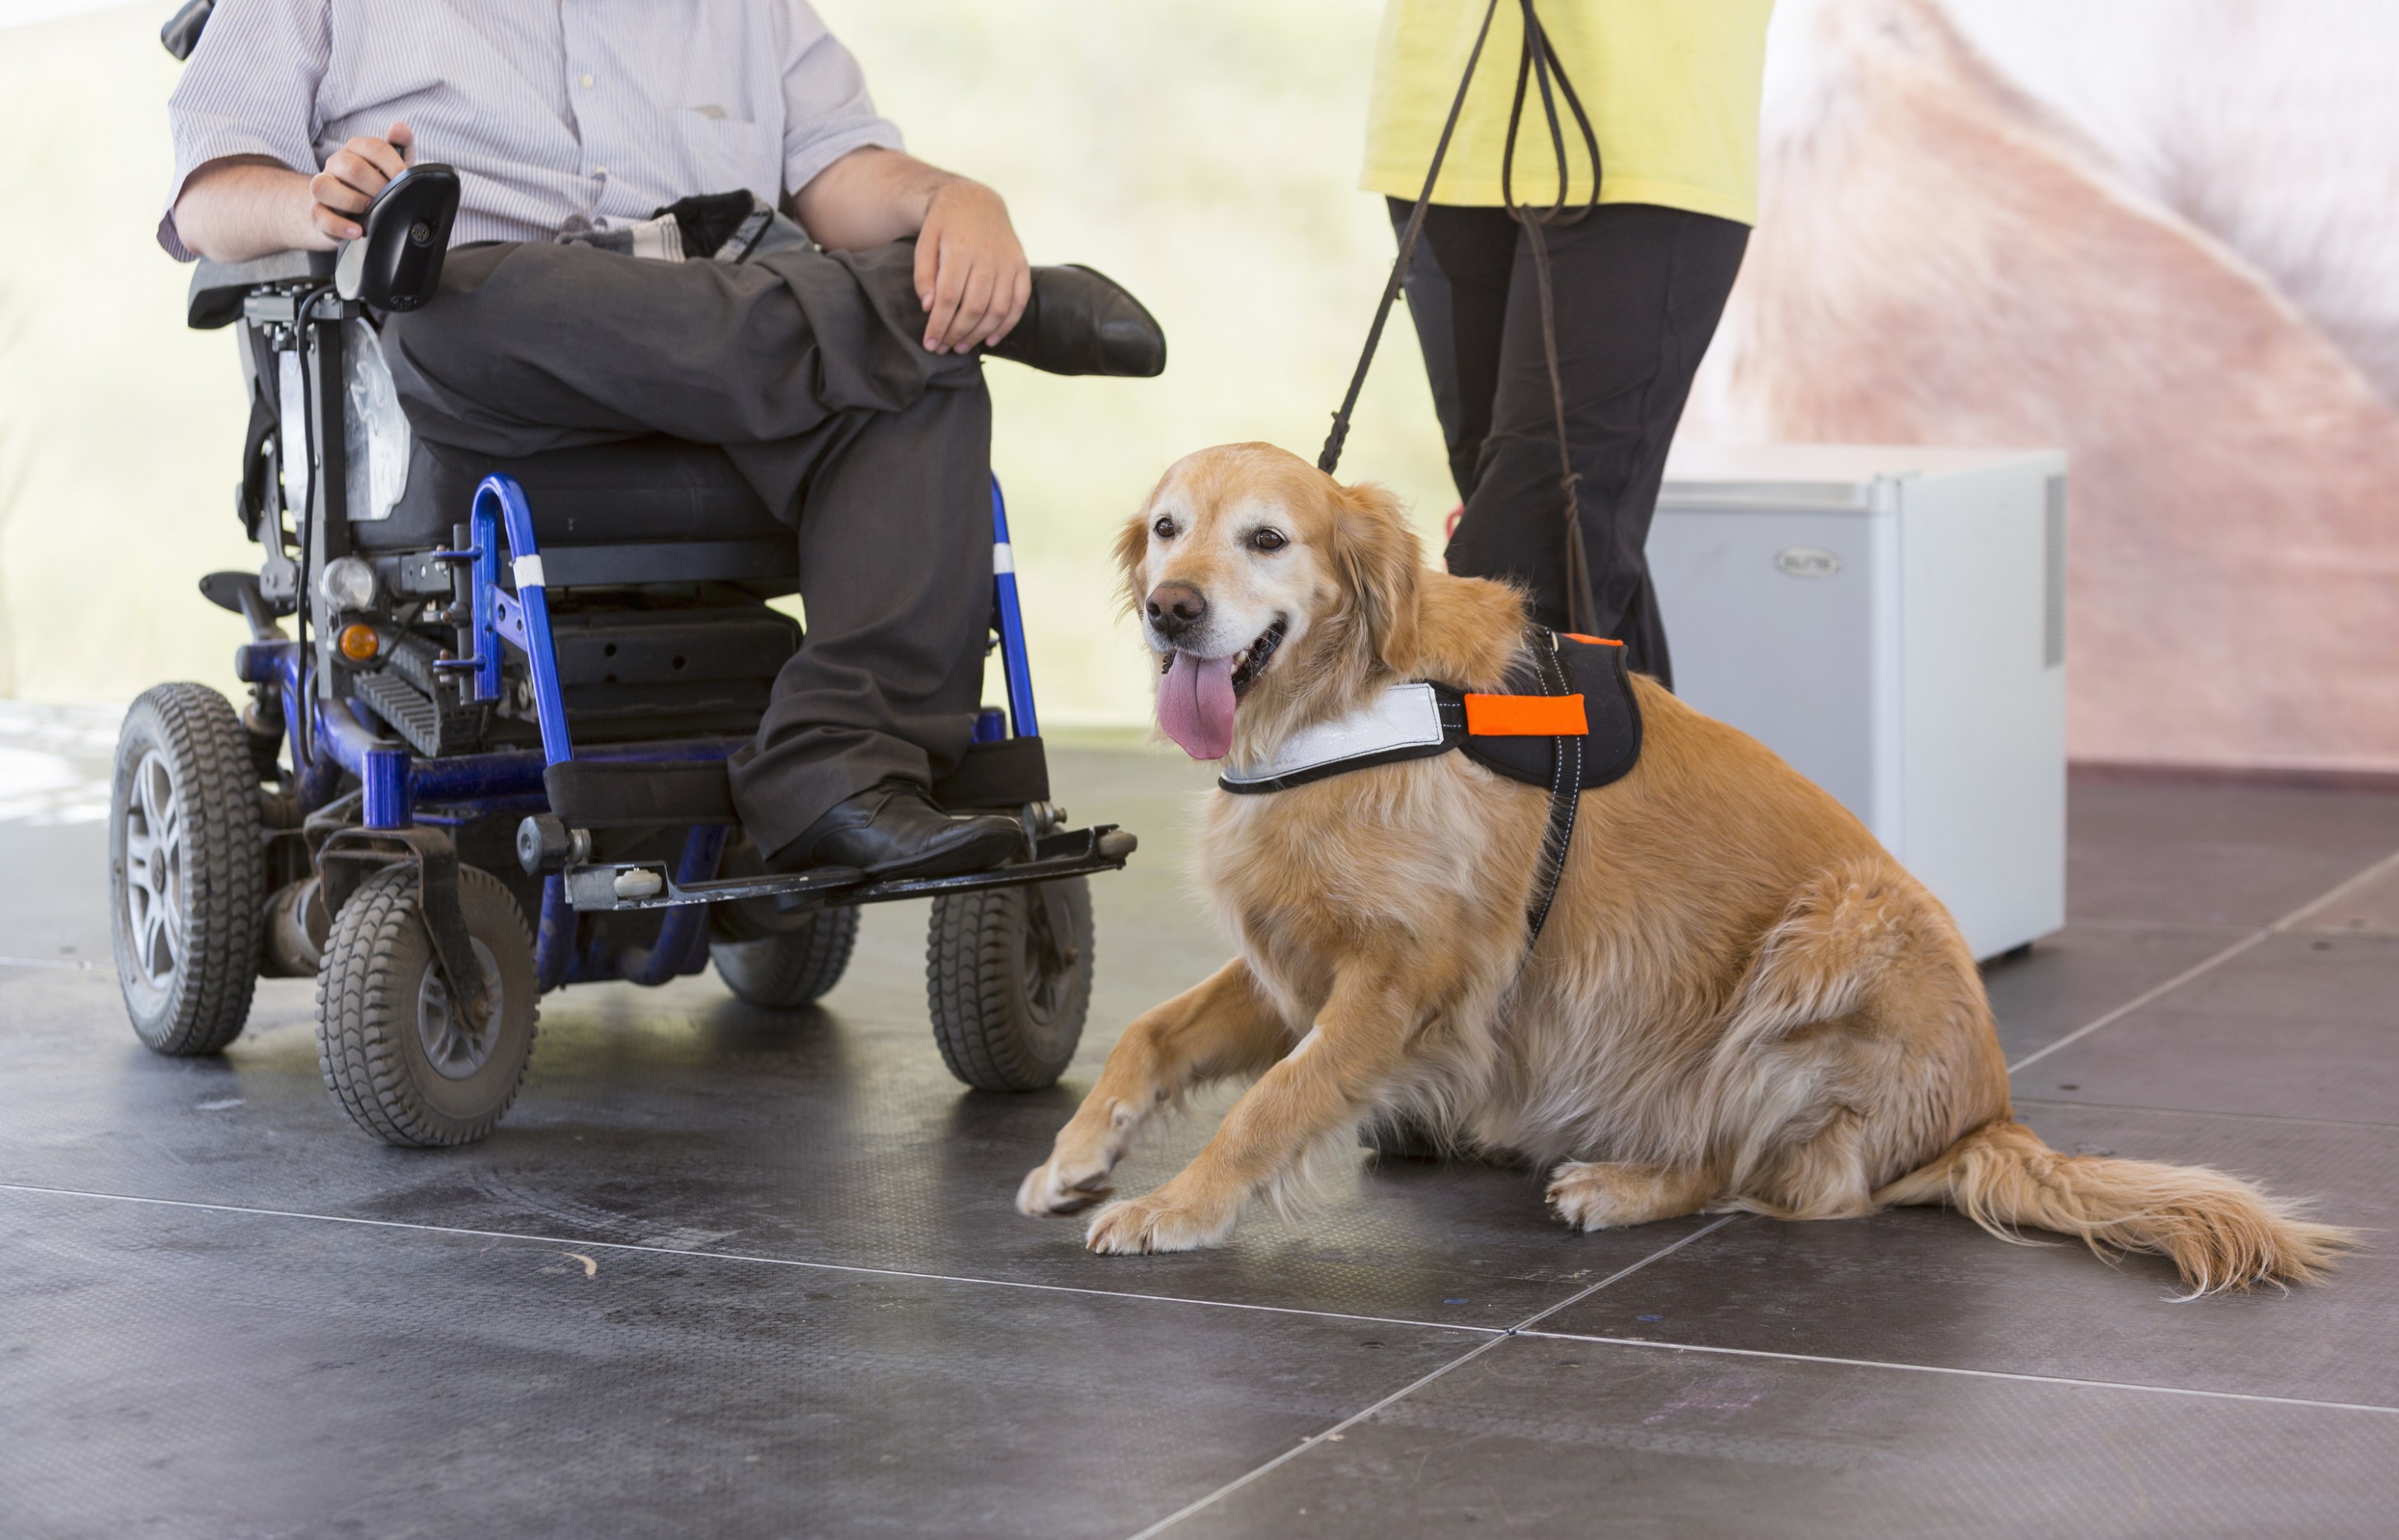 1517657298 Service Assistance And Therapy Dogs What Is The Difference.jpg